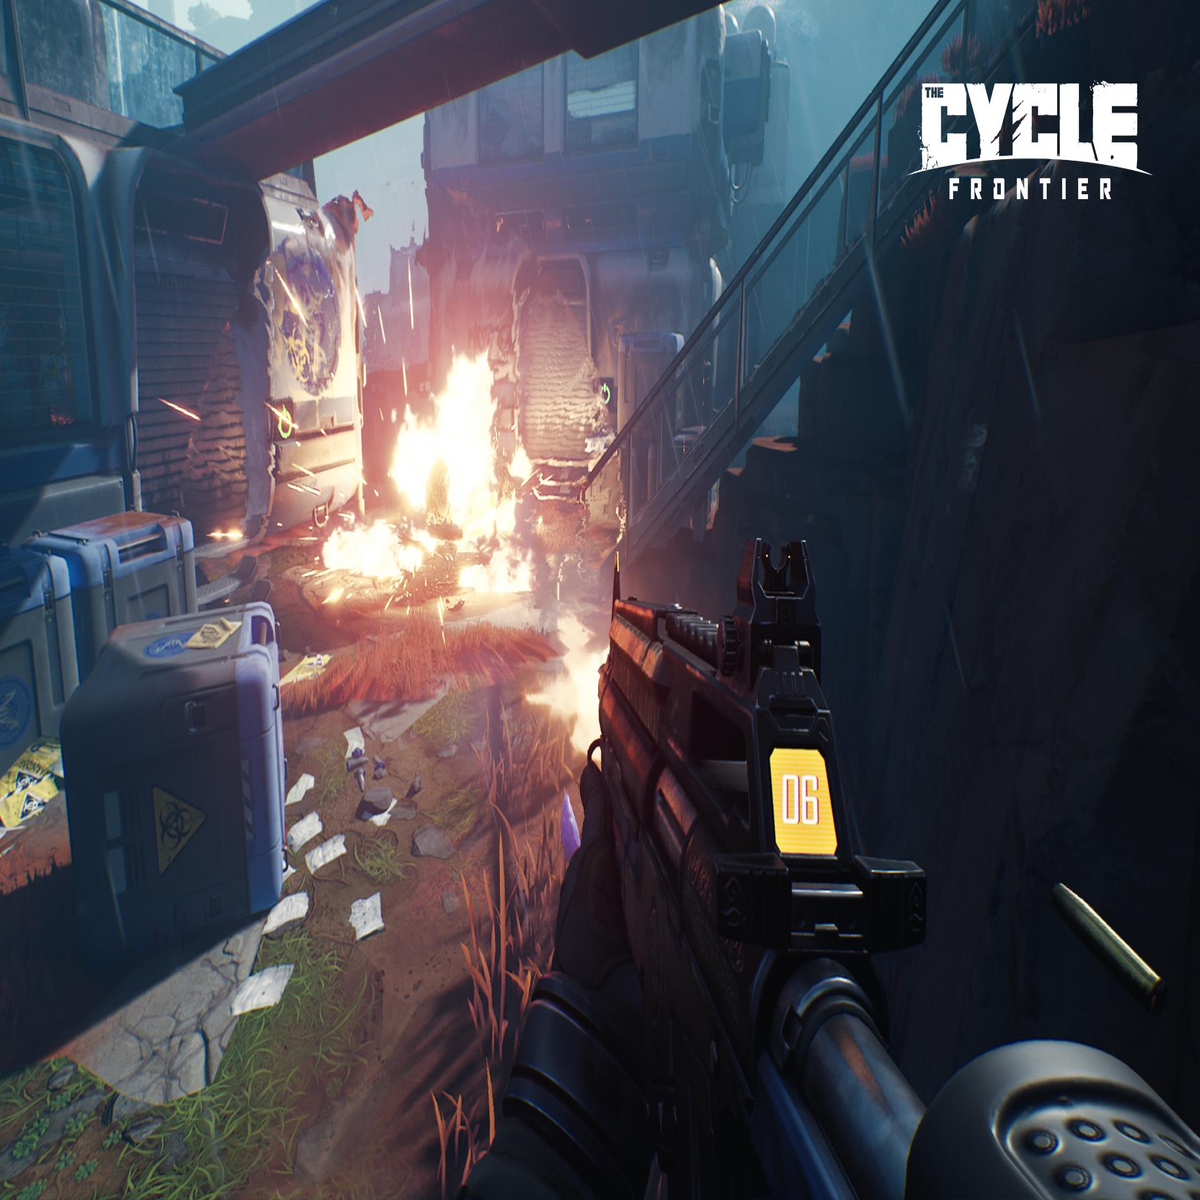 The Cycle: Frontier brings free-to-play sci-fi Tarkov to Steam and